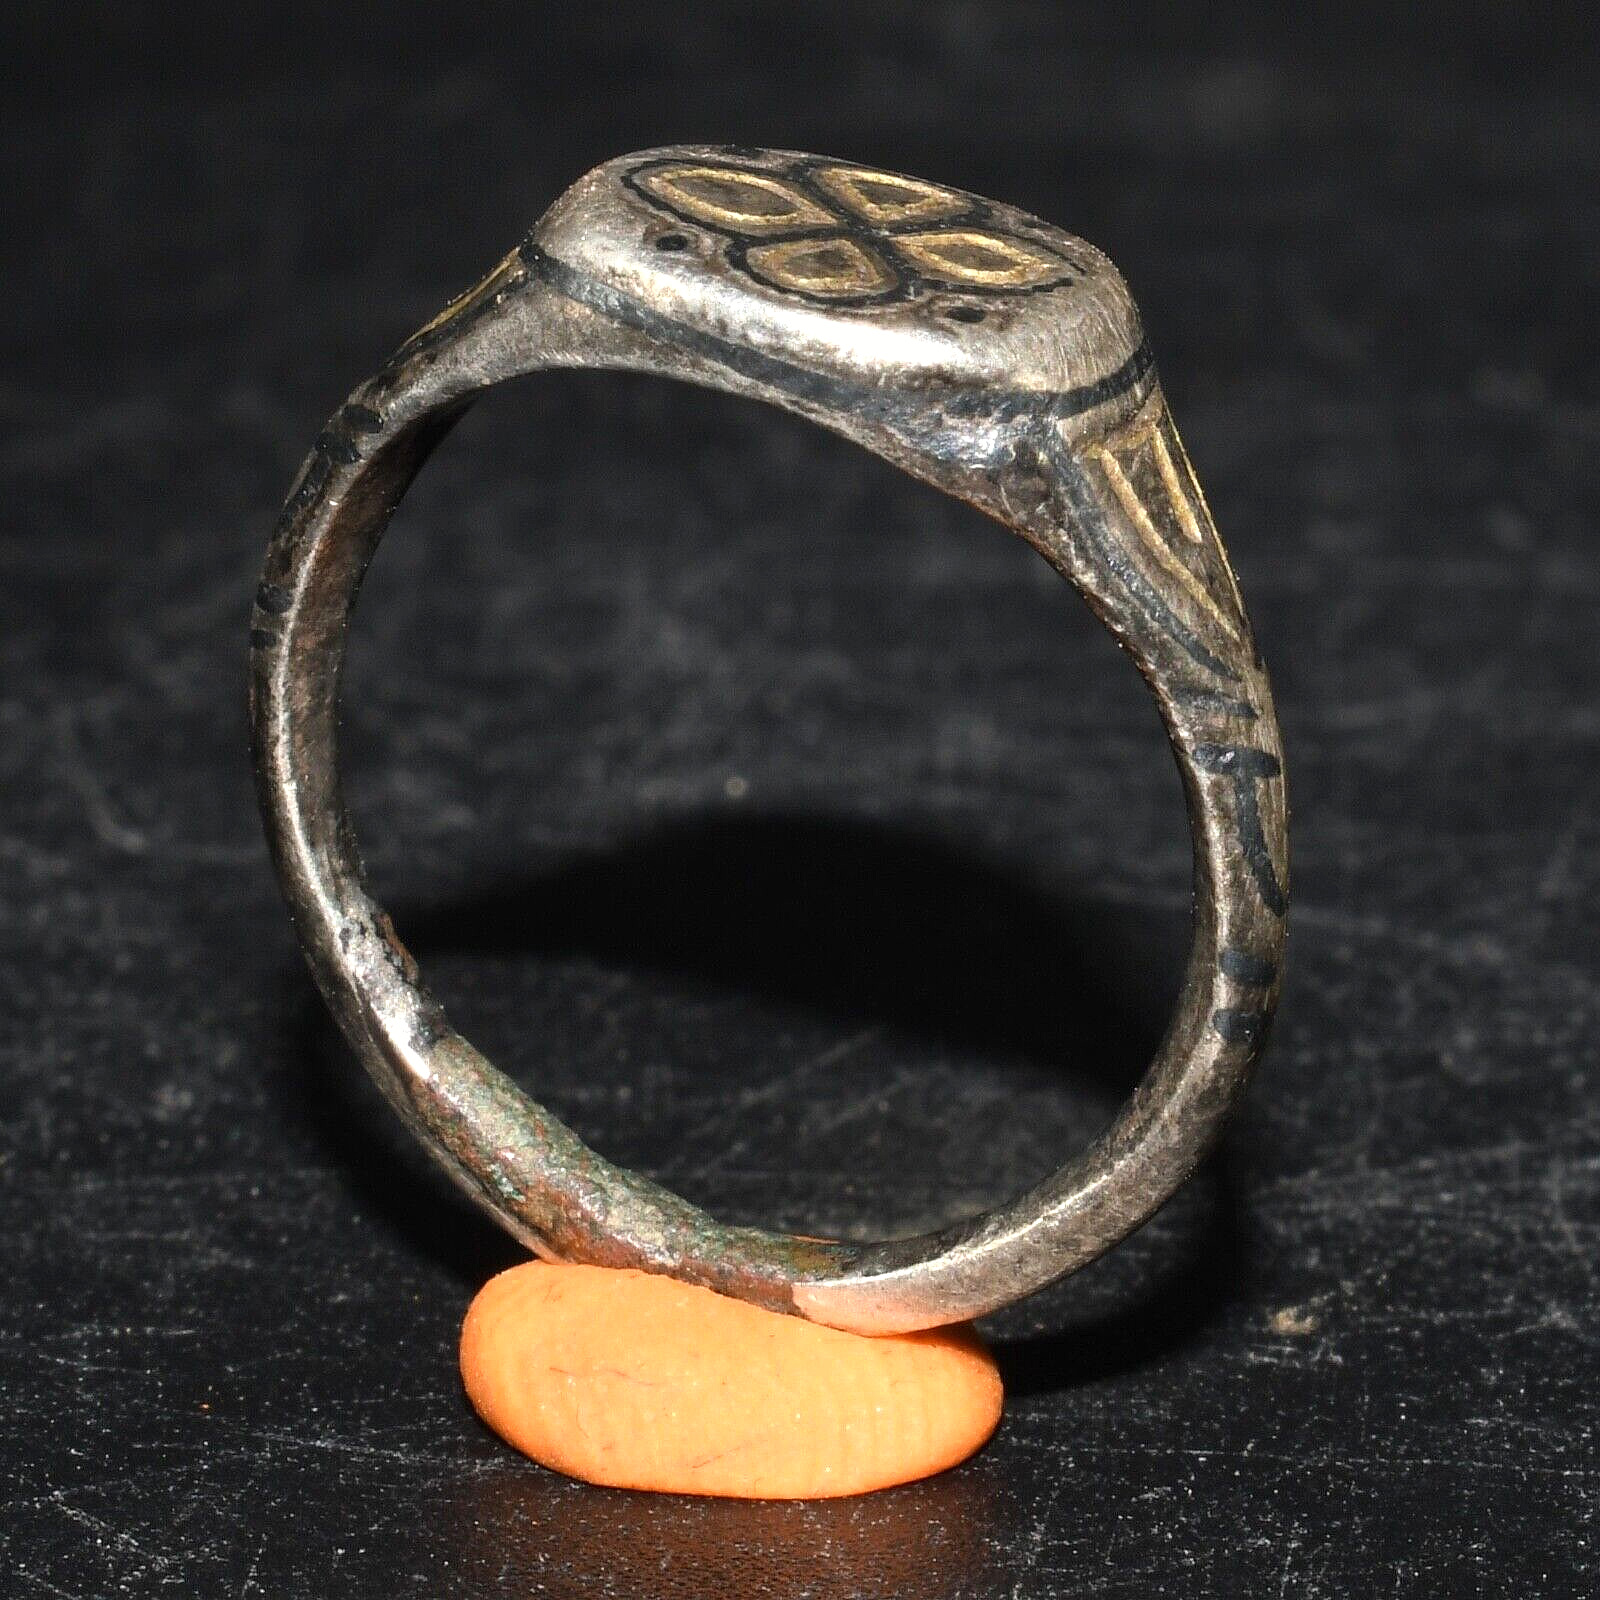 Ancient Sasanian Sassanid Solid Silver ring with Gold Gilding 224-651 Century AD